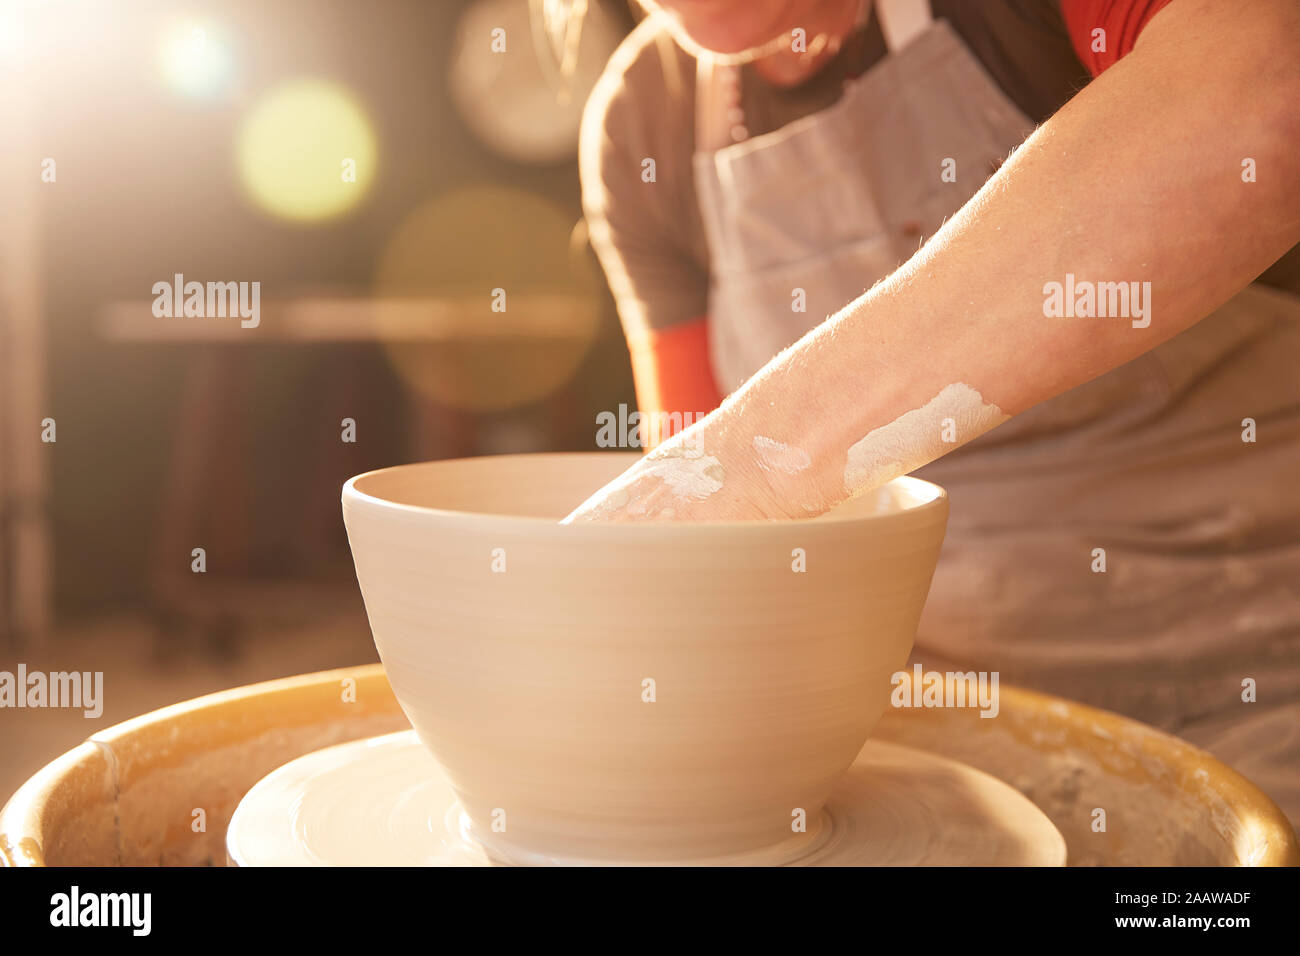 Female potter in her workshop at a shelf Stock Photo